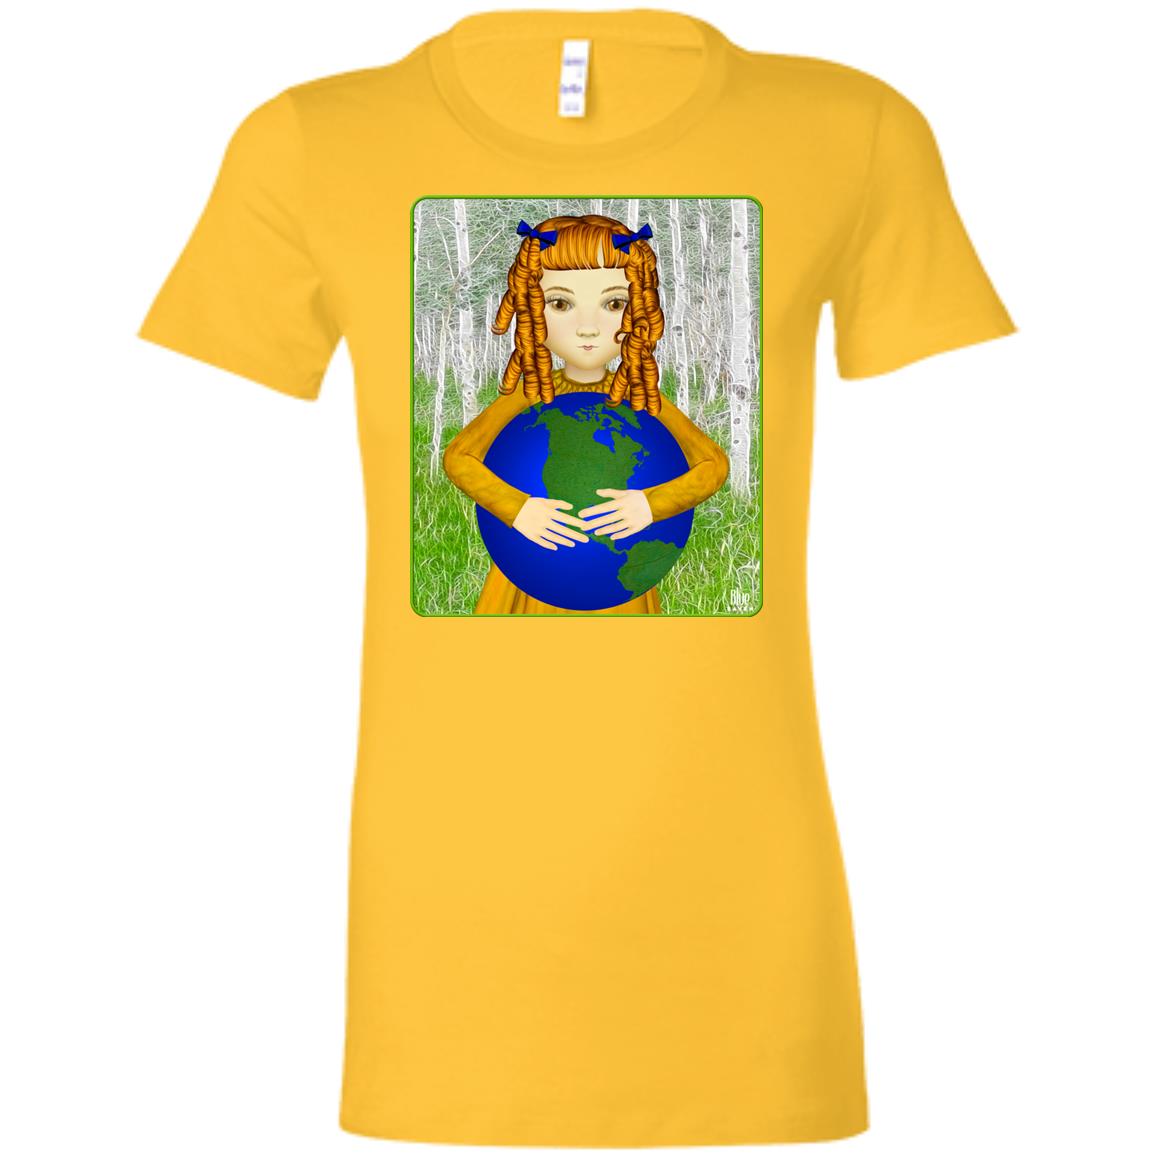 Save My World - Women's Fitted T-Shirt